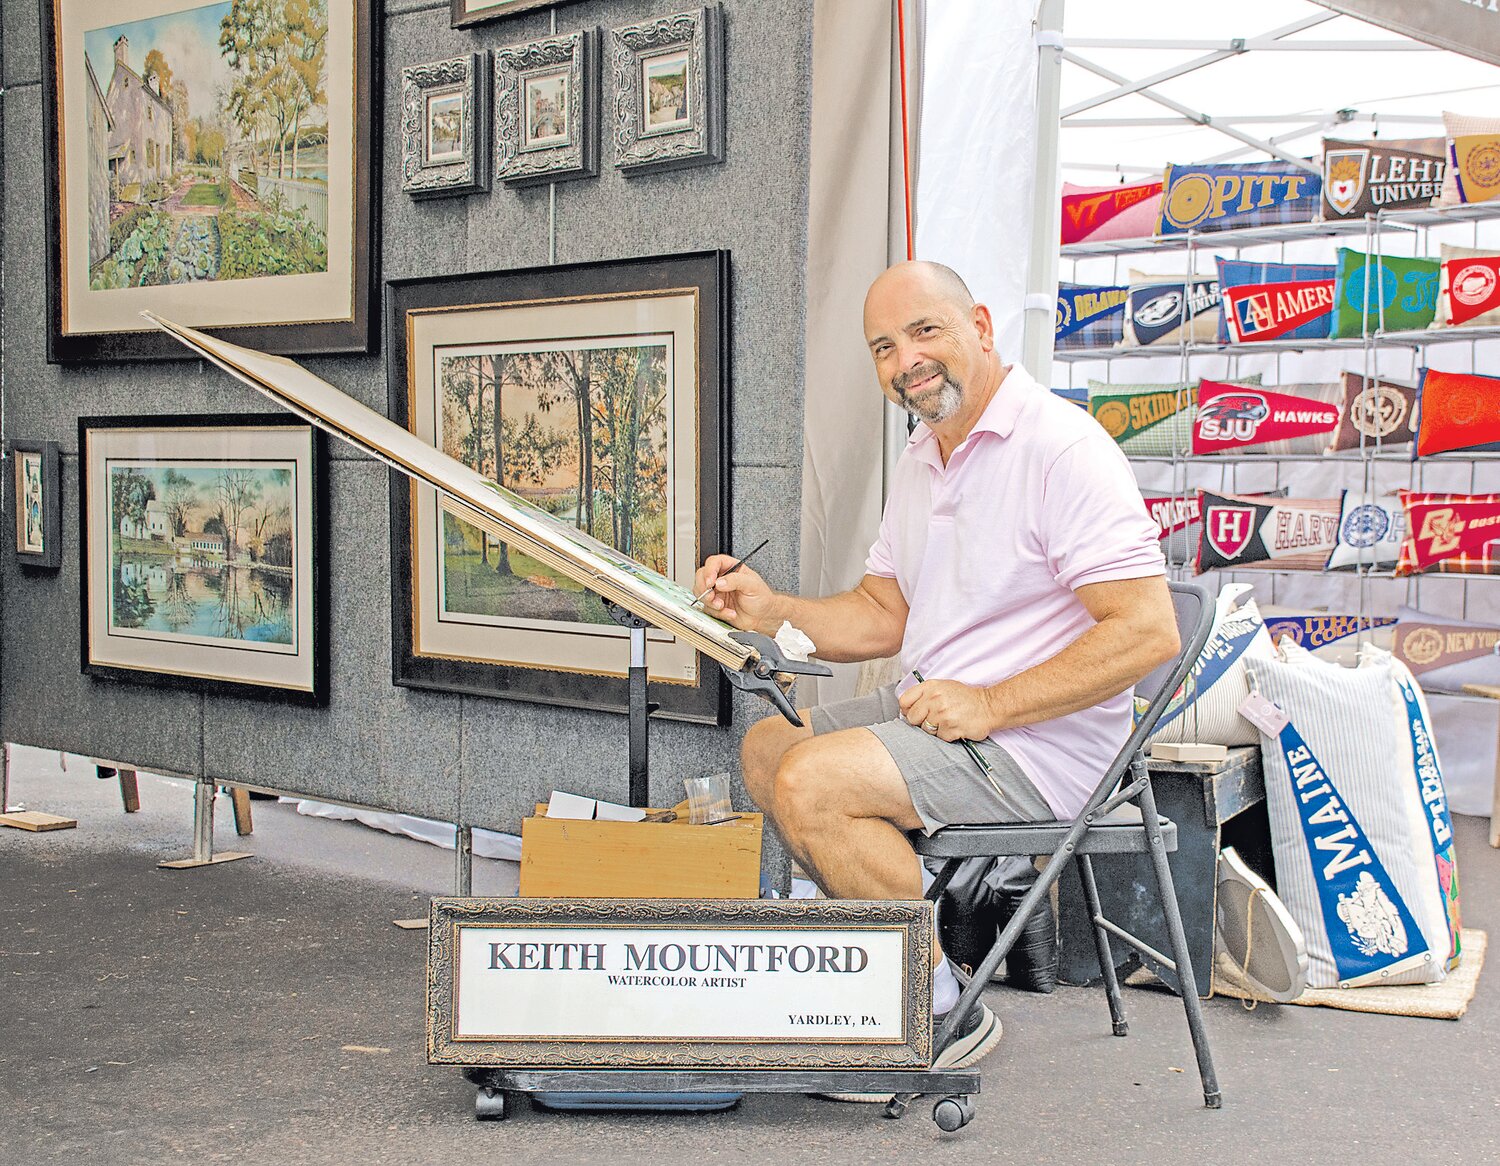 Watercolor artist Keith Mountford paints during the arts festival.